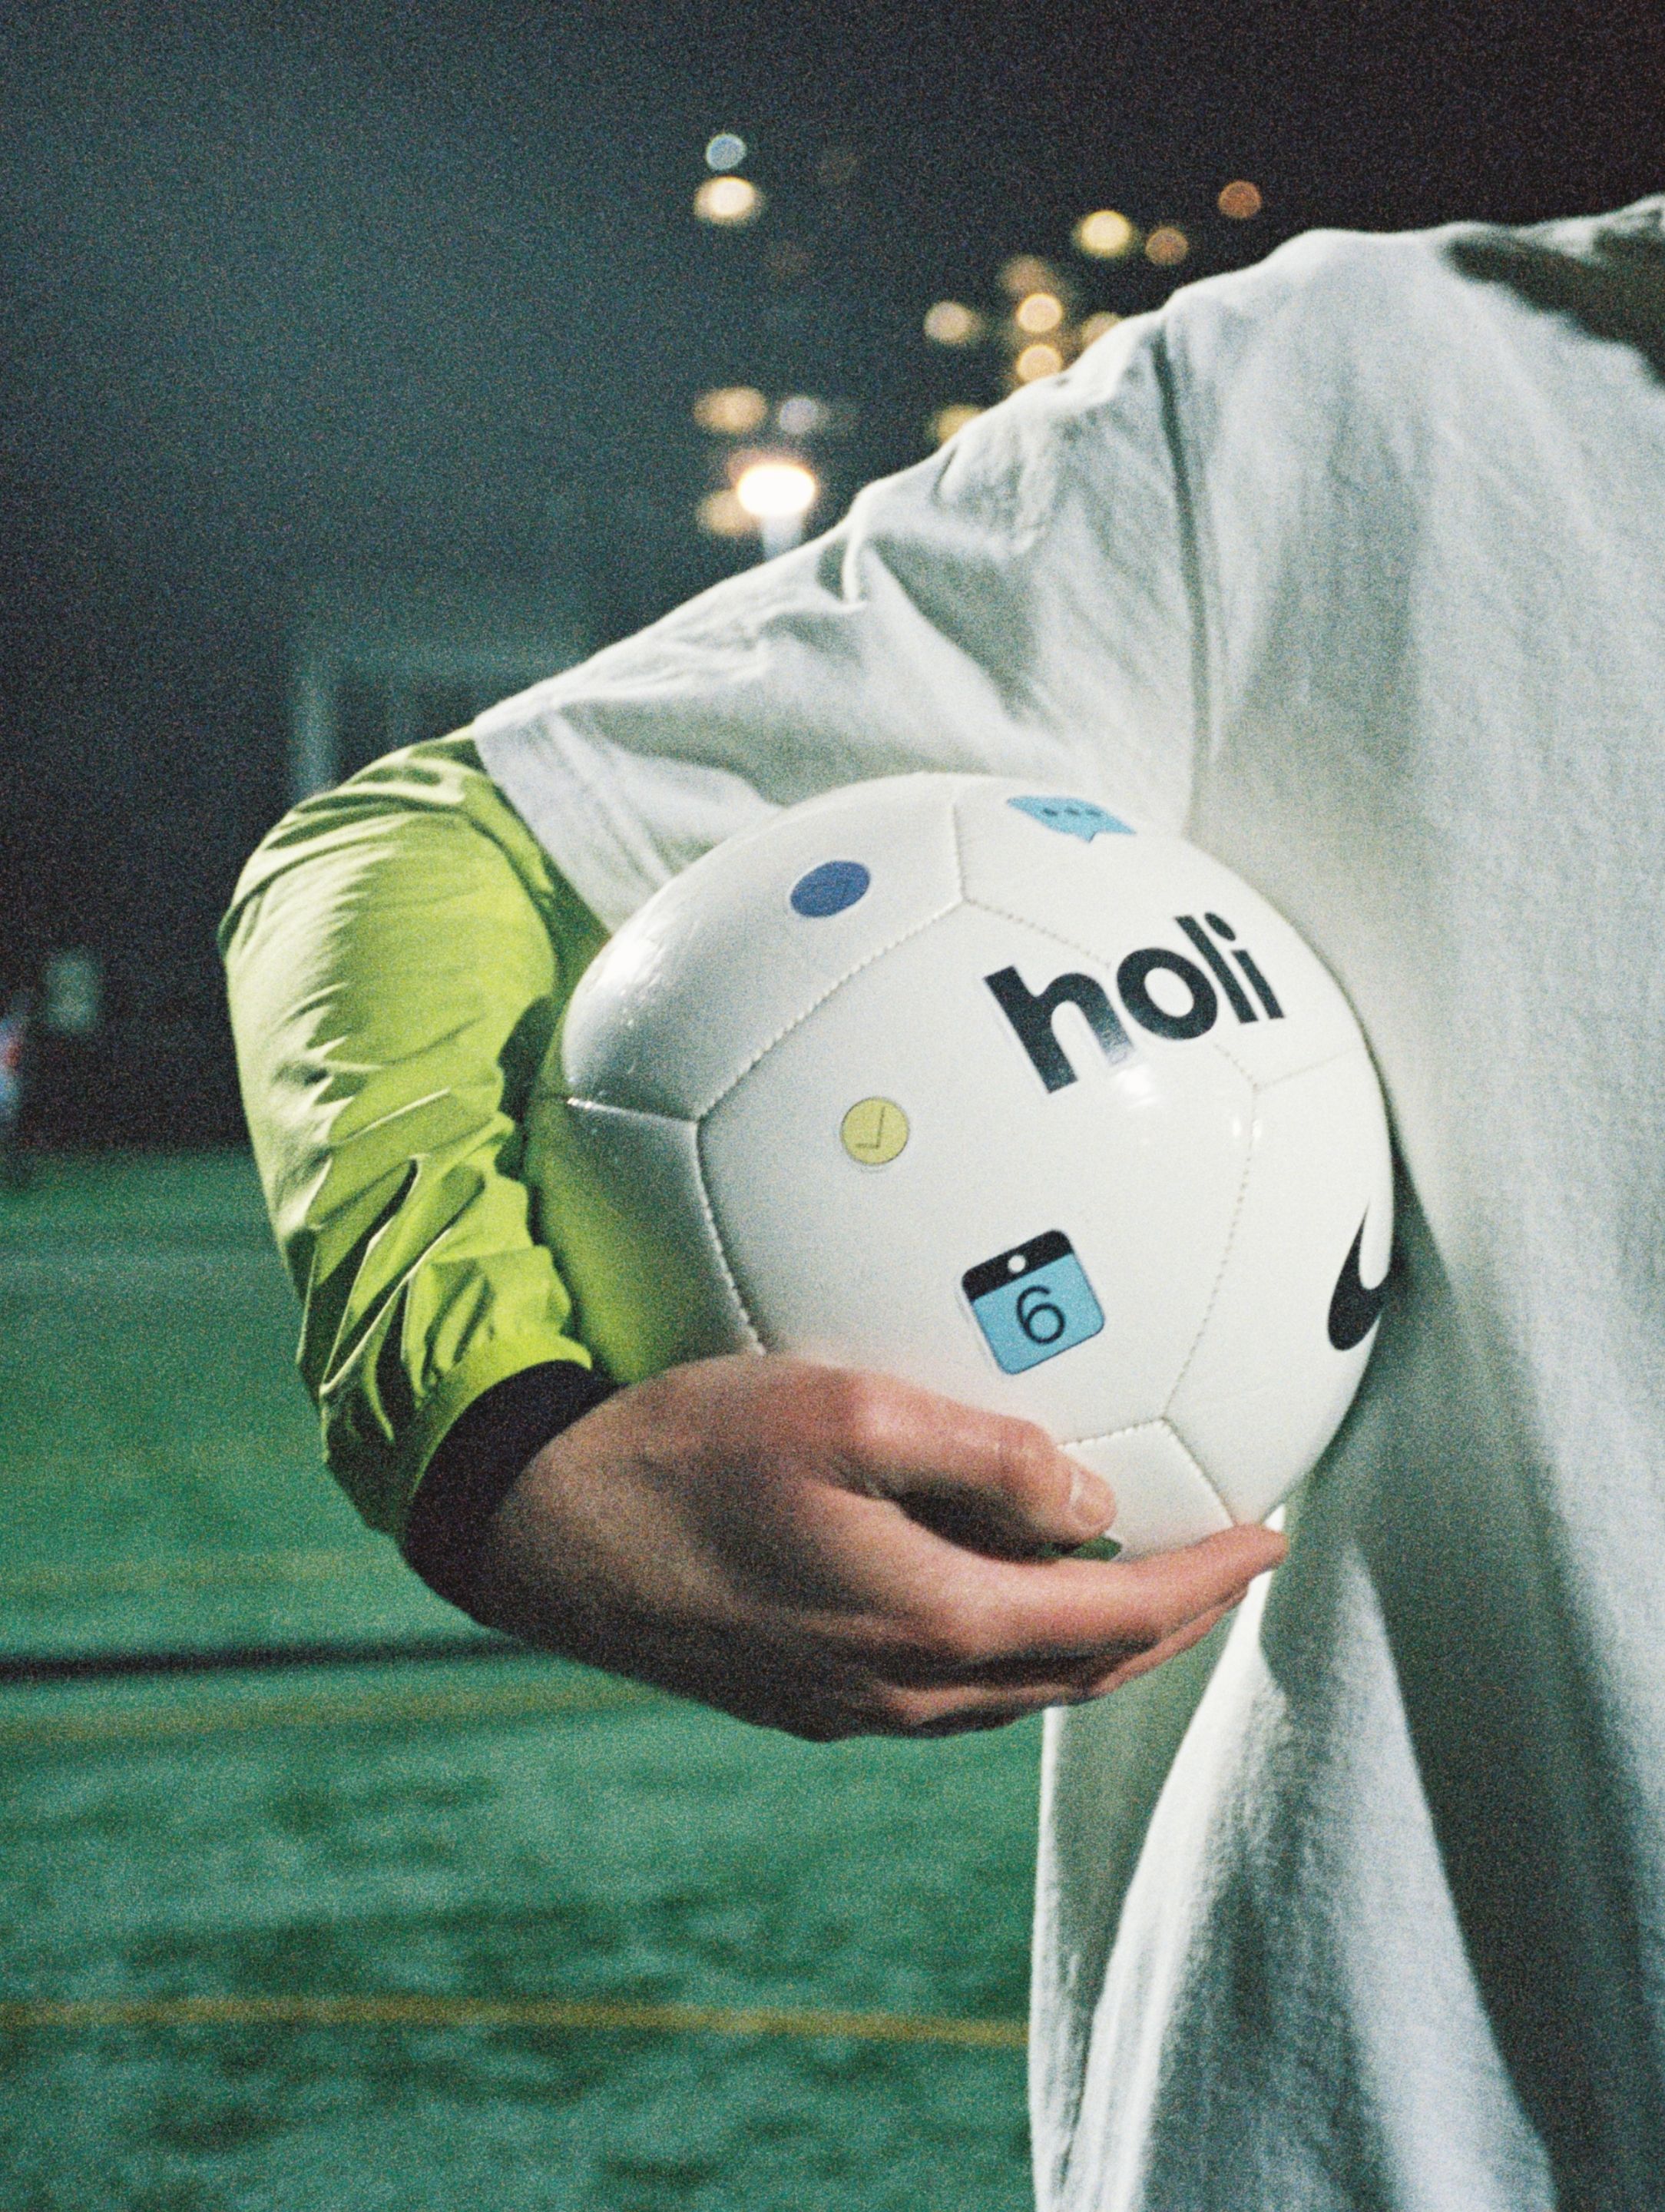 A person standing on a football pitch holding a football covered in holi stickers 